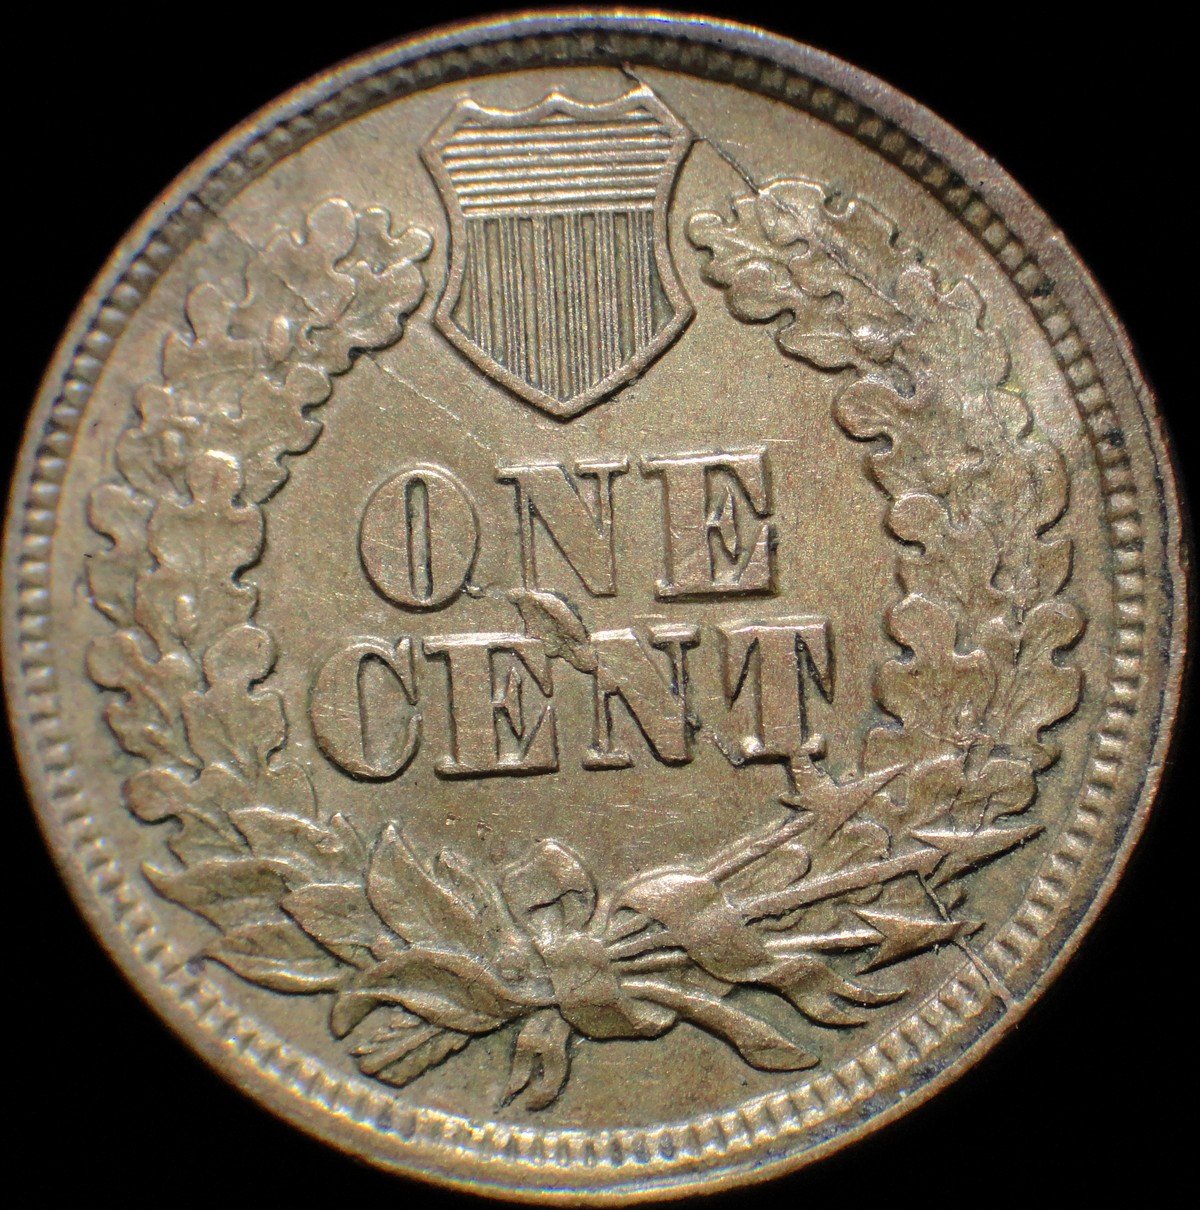 1863 CRK-001 - Indian Head Penny